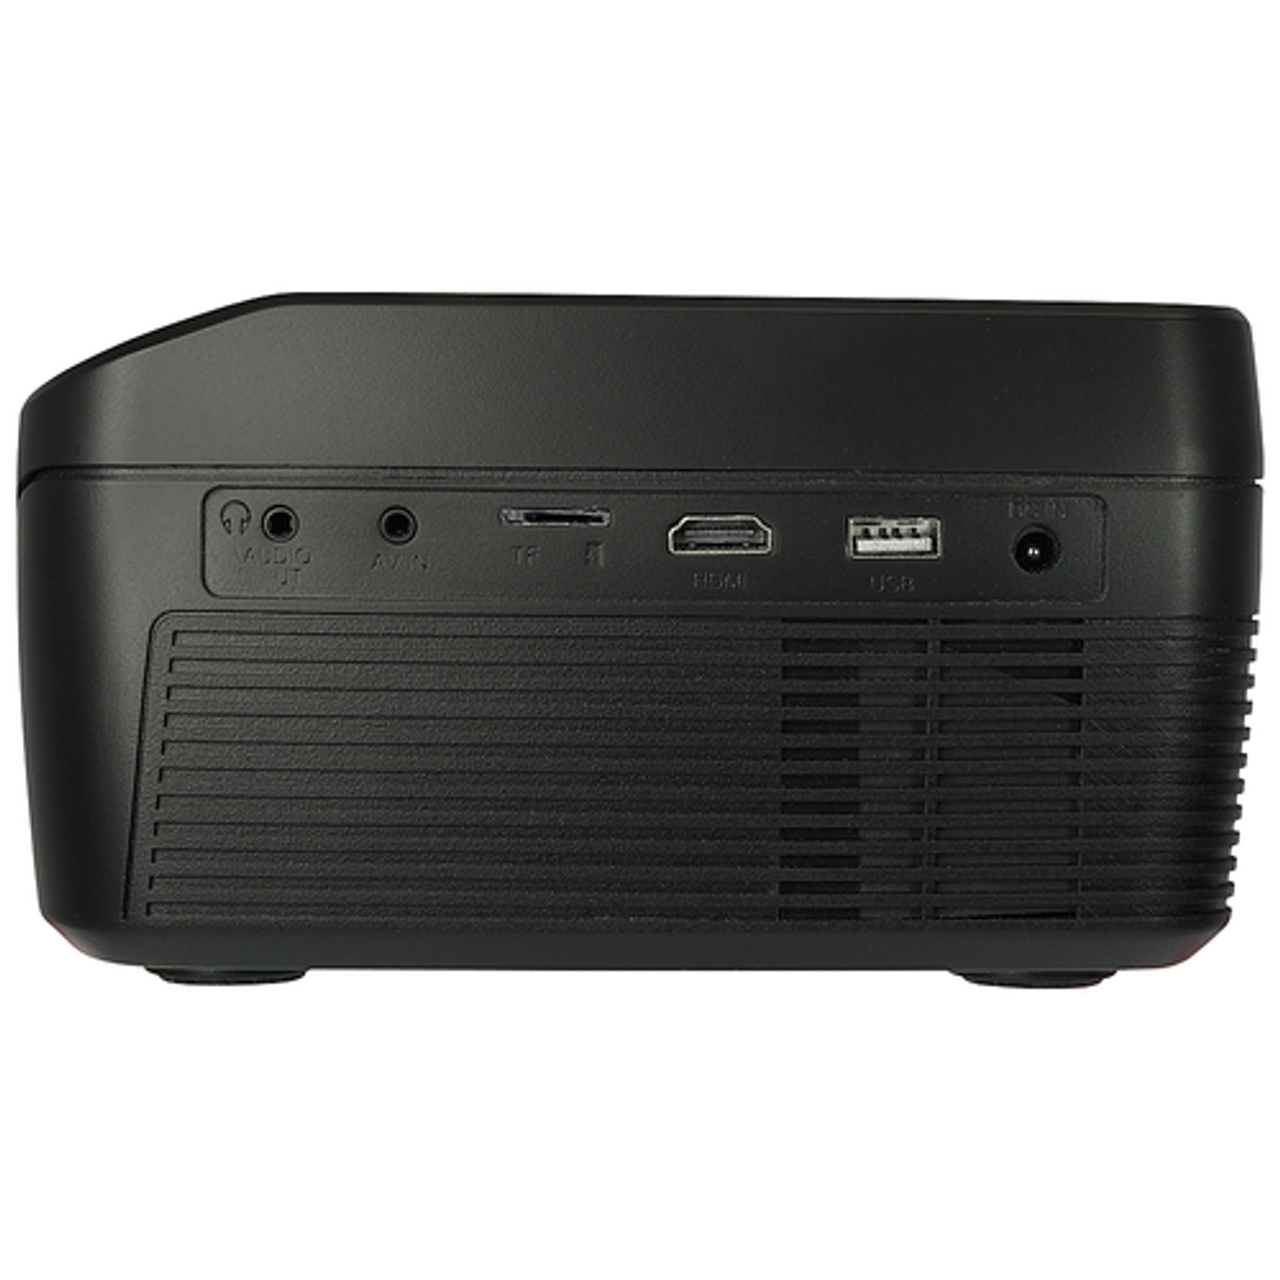 GPX - Mini Projector with Bluetooth & DVD Player - Black